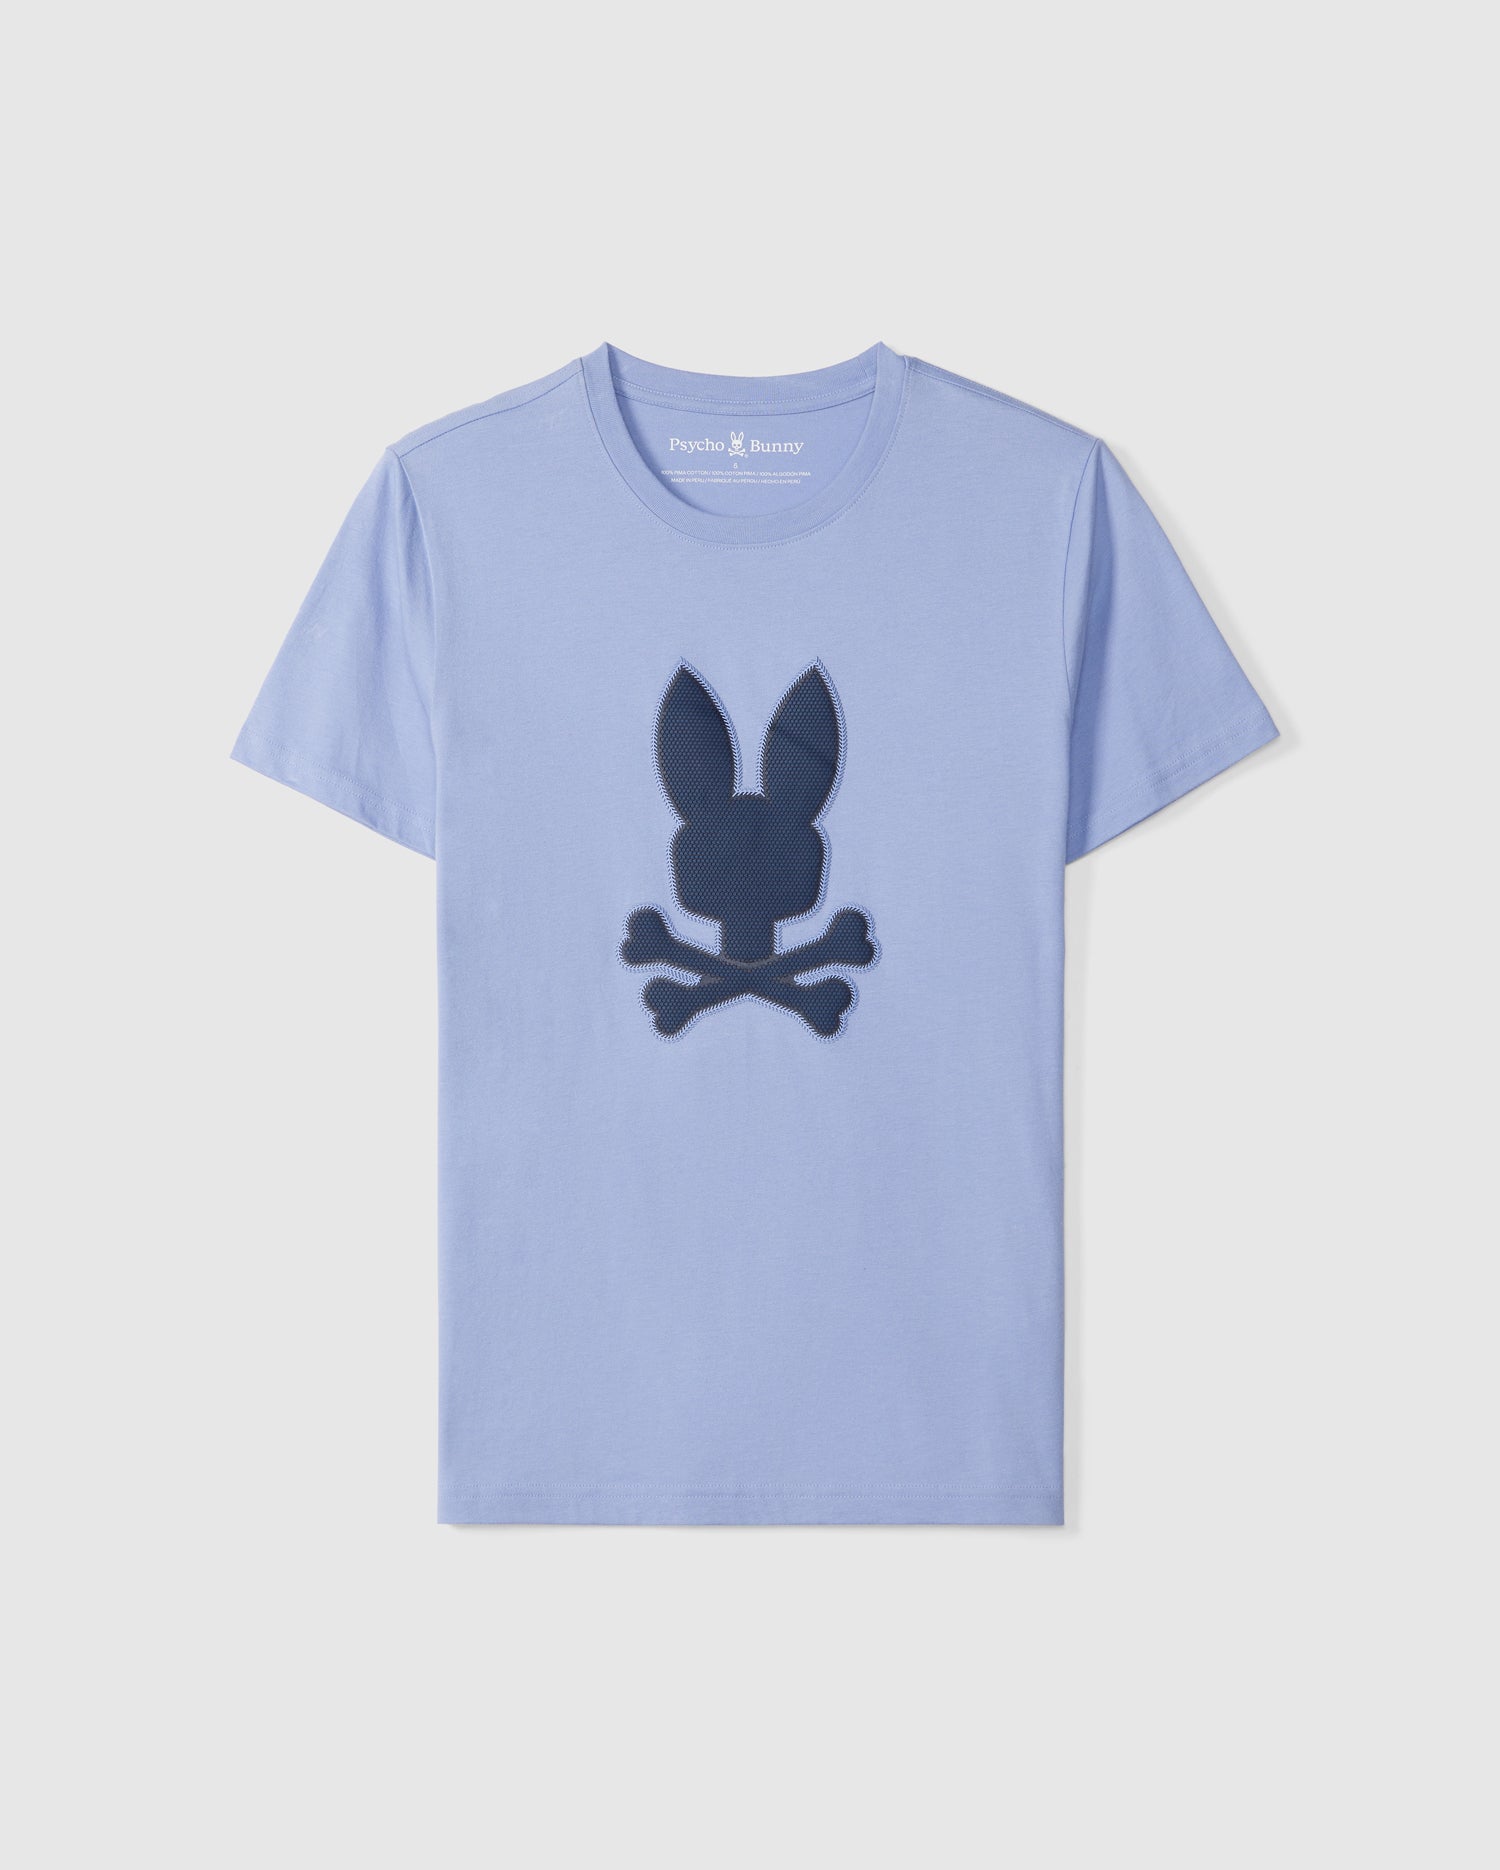 A light blue short-sleeve graphic tee with a large dark blue logo on the front. The logo features the silhouette of a bunny head with ears pointing up, positioned over a pair of crossed bones. Made from premium Peruvian Pima cotton, the neckline boasts 